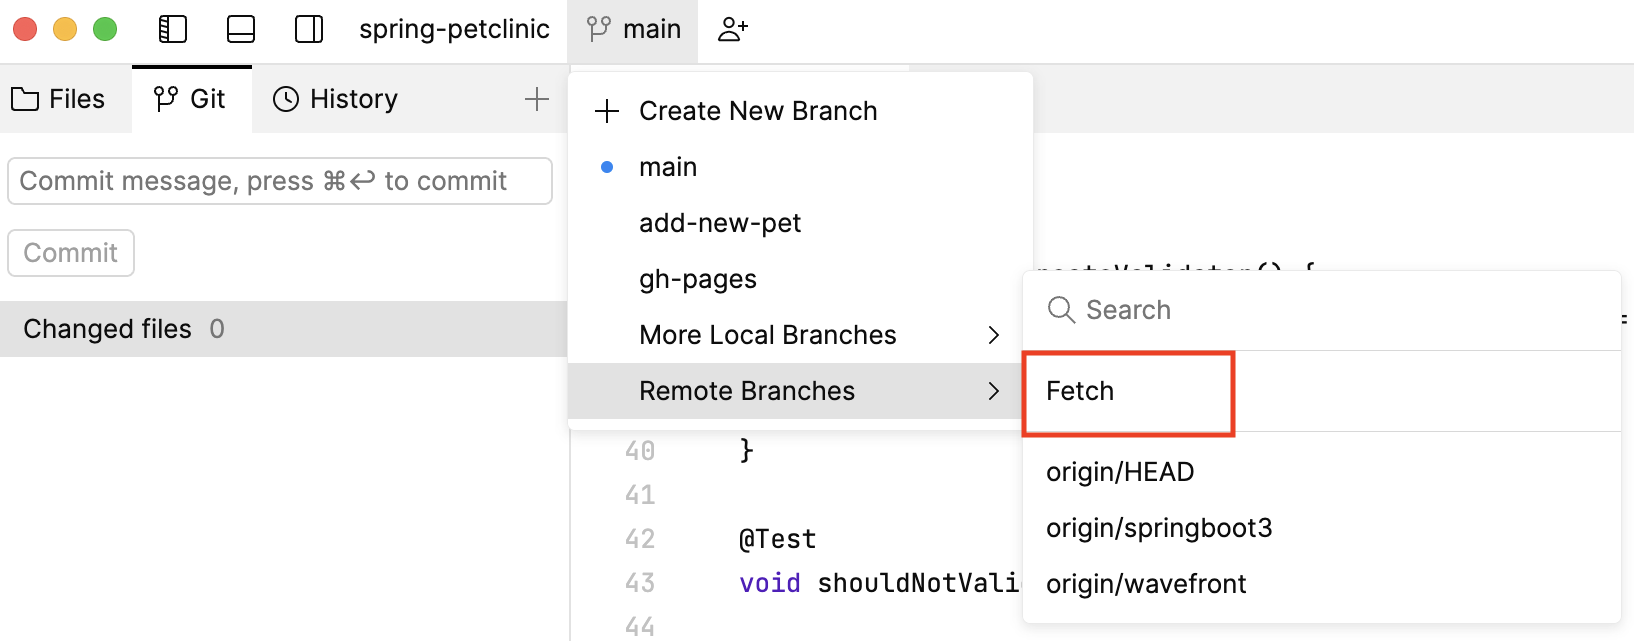 Fetch option in the branches menu